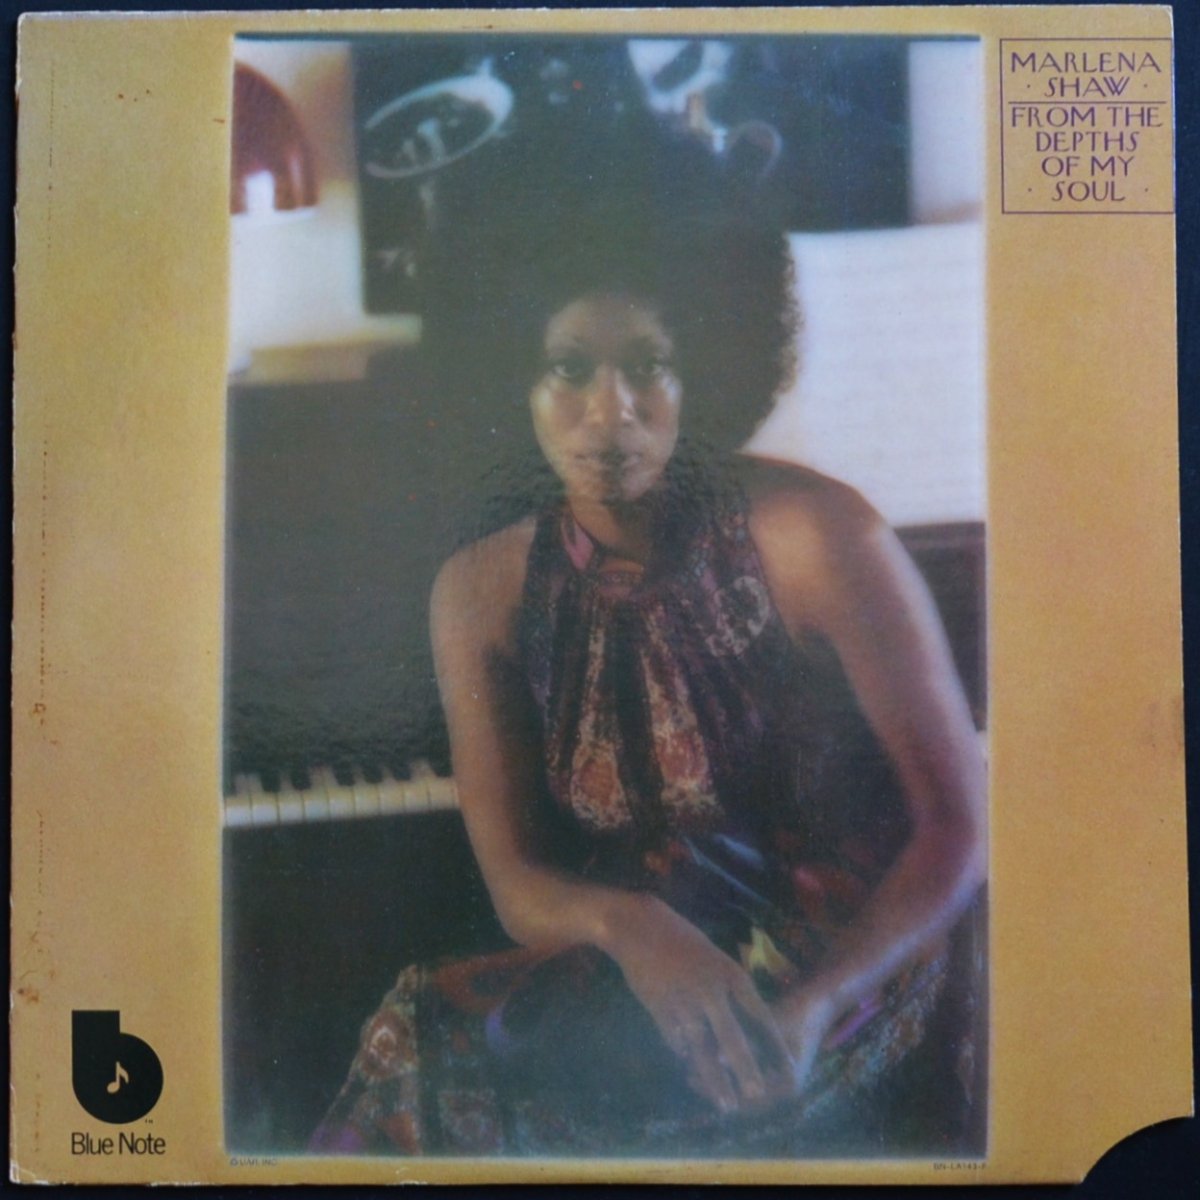 MARLENA SHAW / FROM THE DEPTHS OF MY SOUL (LP)